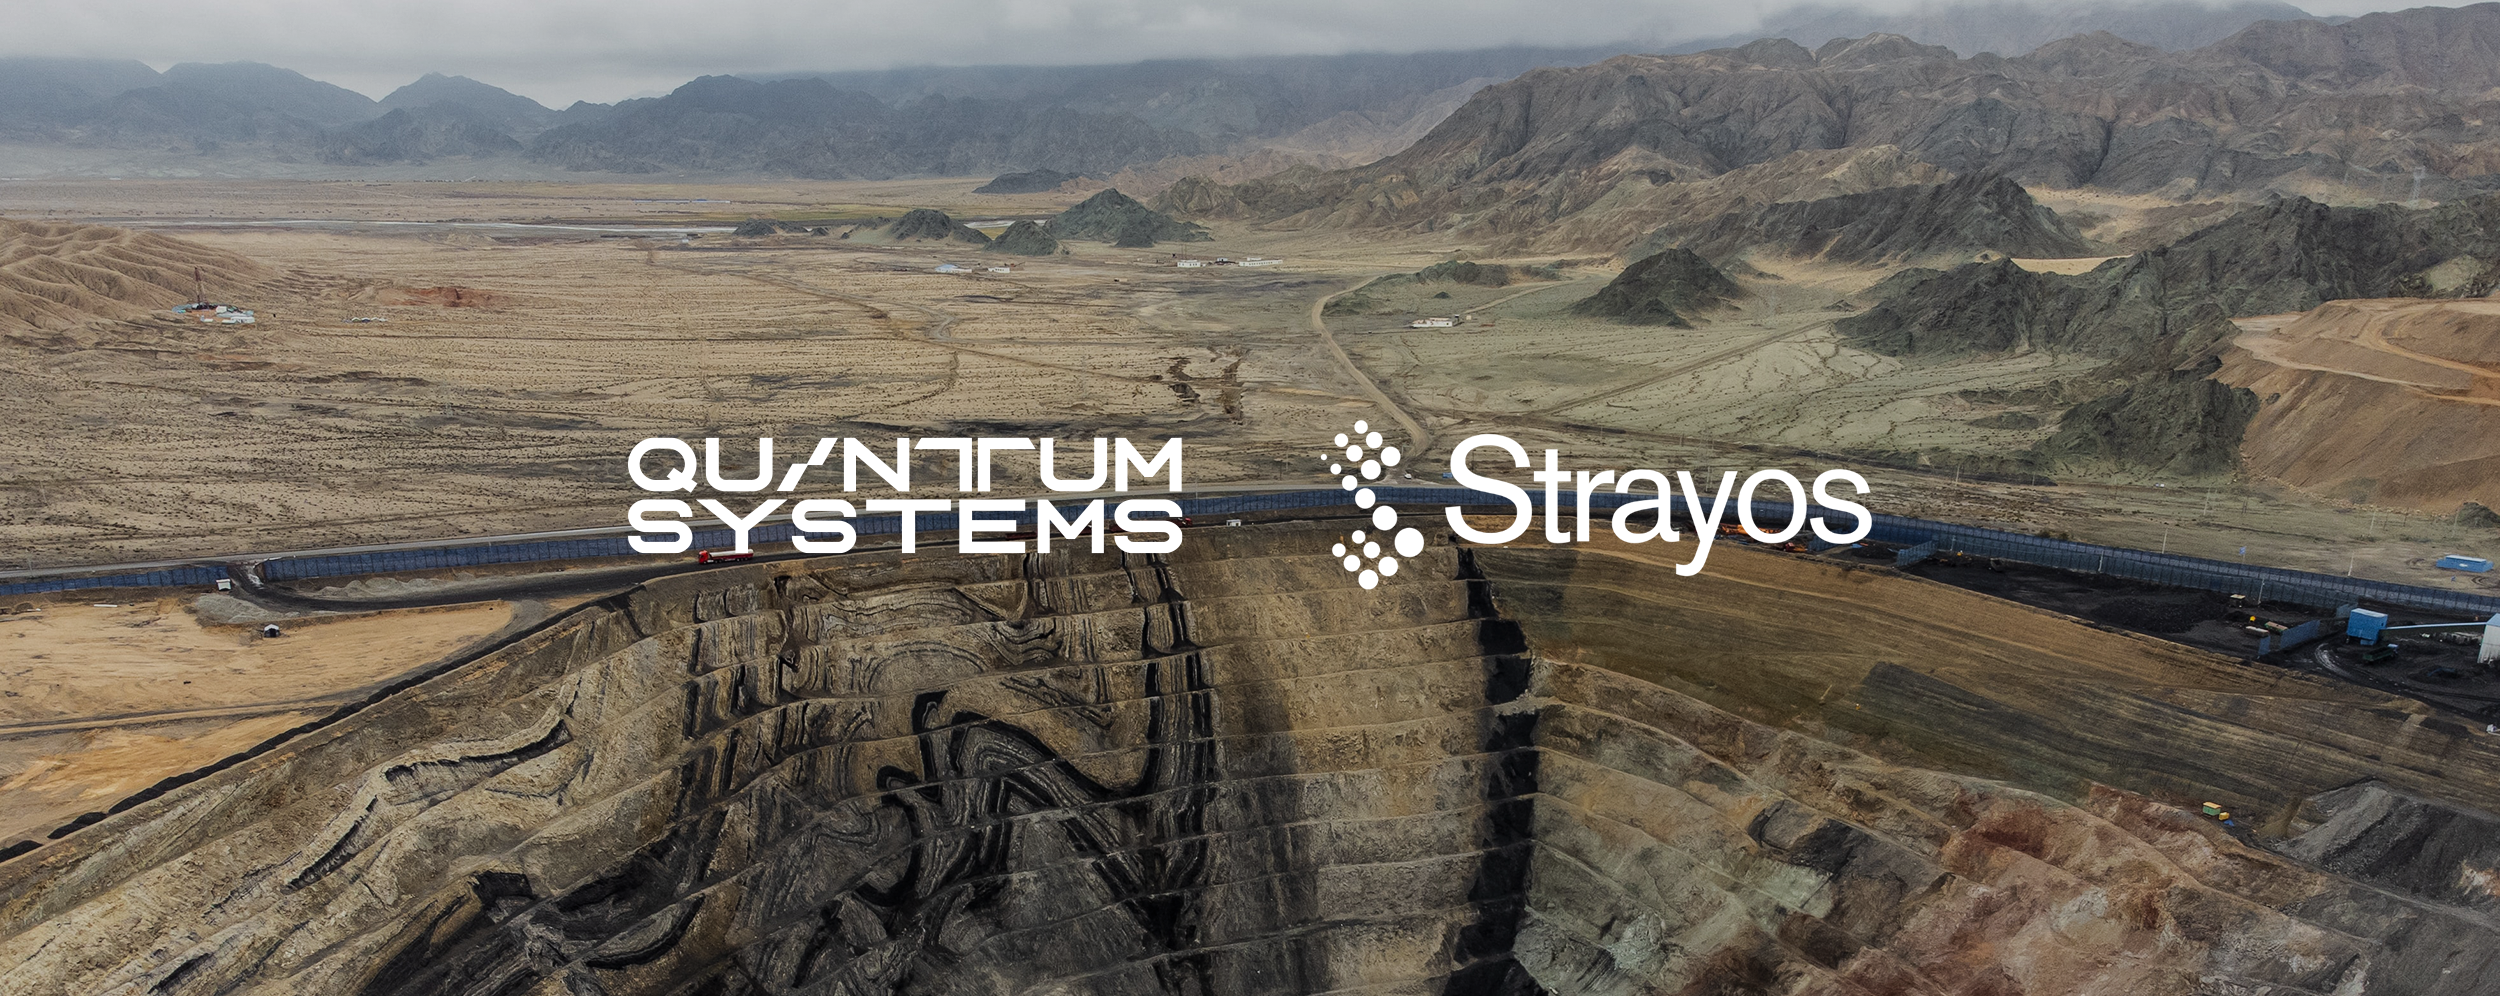 Strayos and Quantum Systems Announce Strategic Partnership to Revolutionize Mining Operations